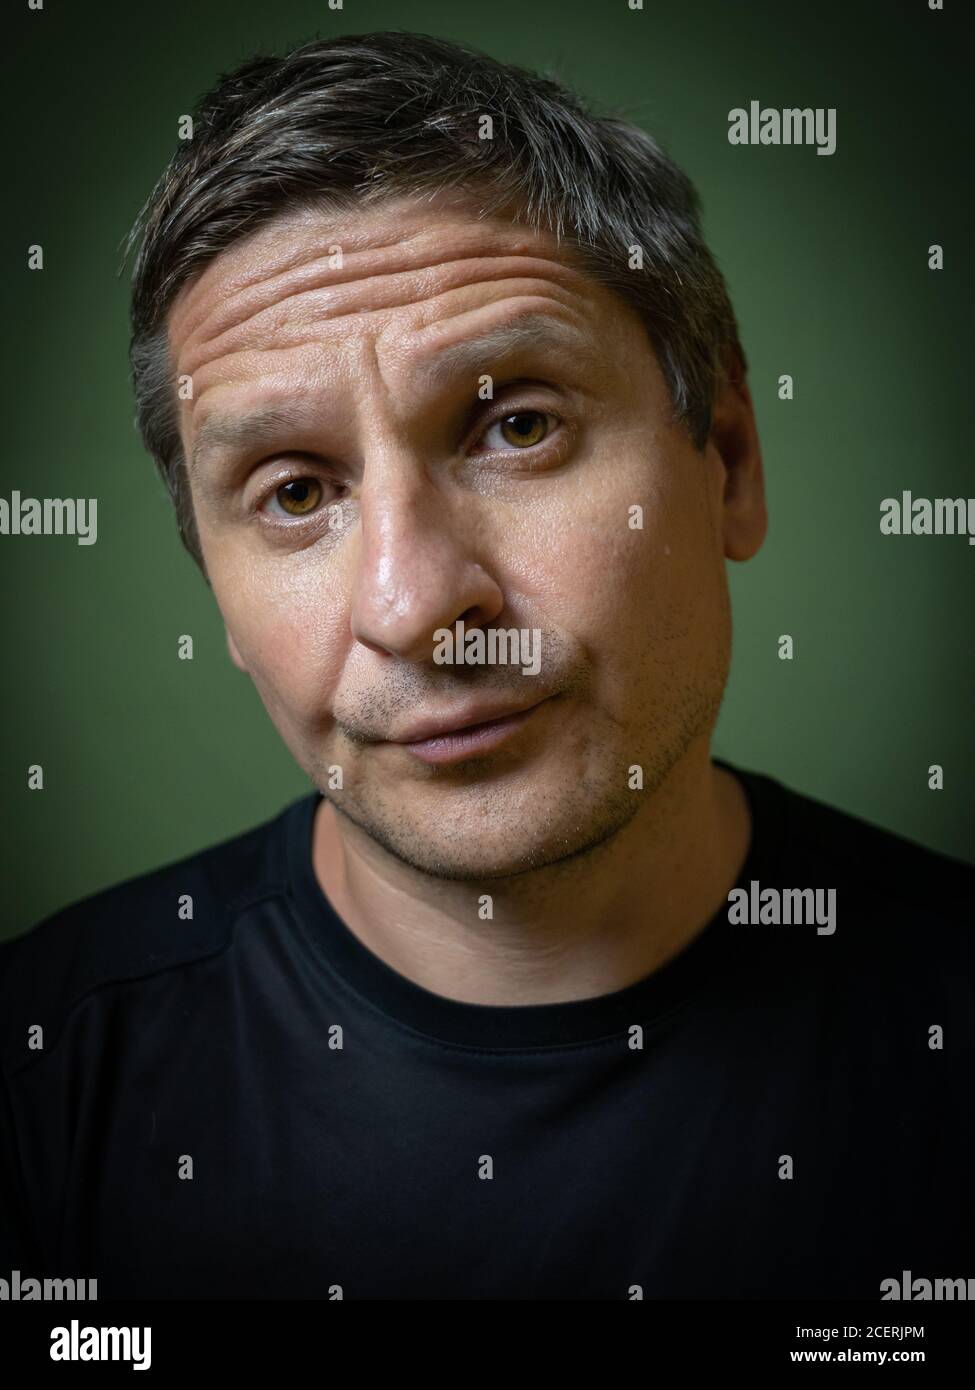 Studio portrait of no smiling 40 years old white (caucasian) man. Rembrandt lighting. Magazine cover style. Stock Photo